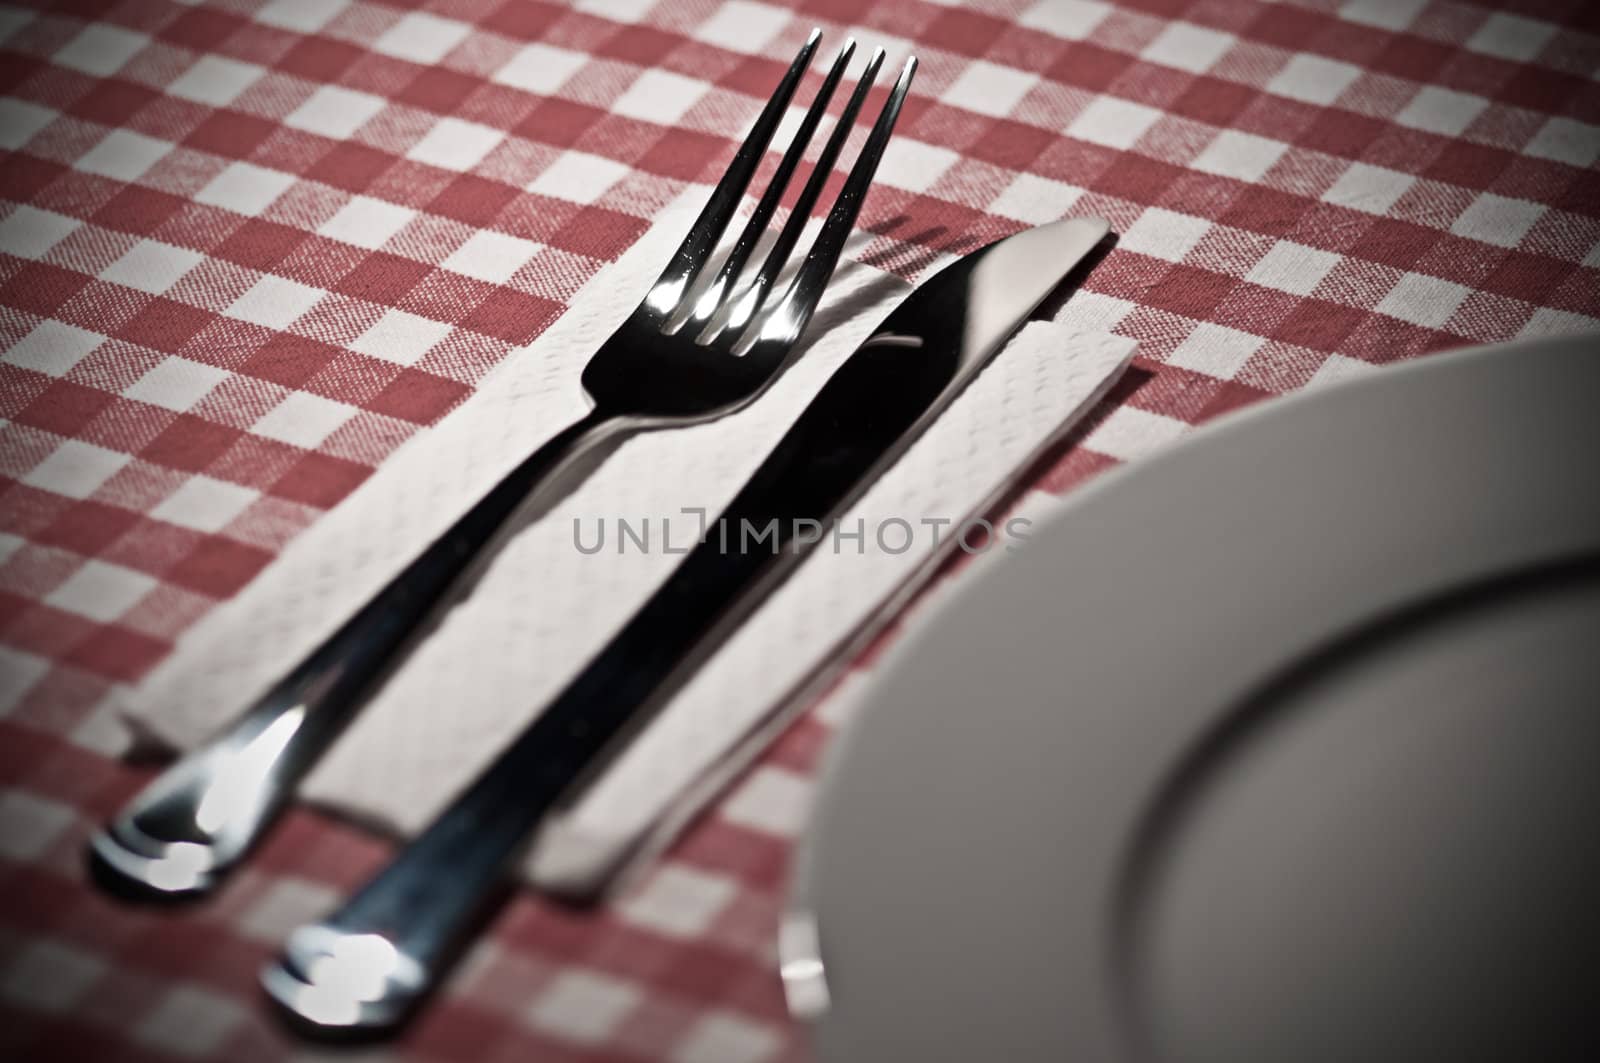 Fork, knife and plate on a table with a red and white tablecloth. Desaturated and gritty look.